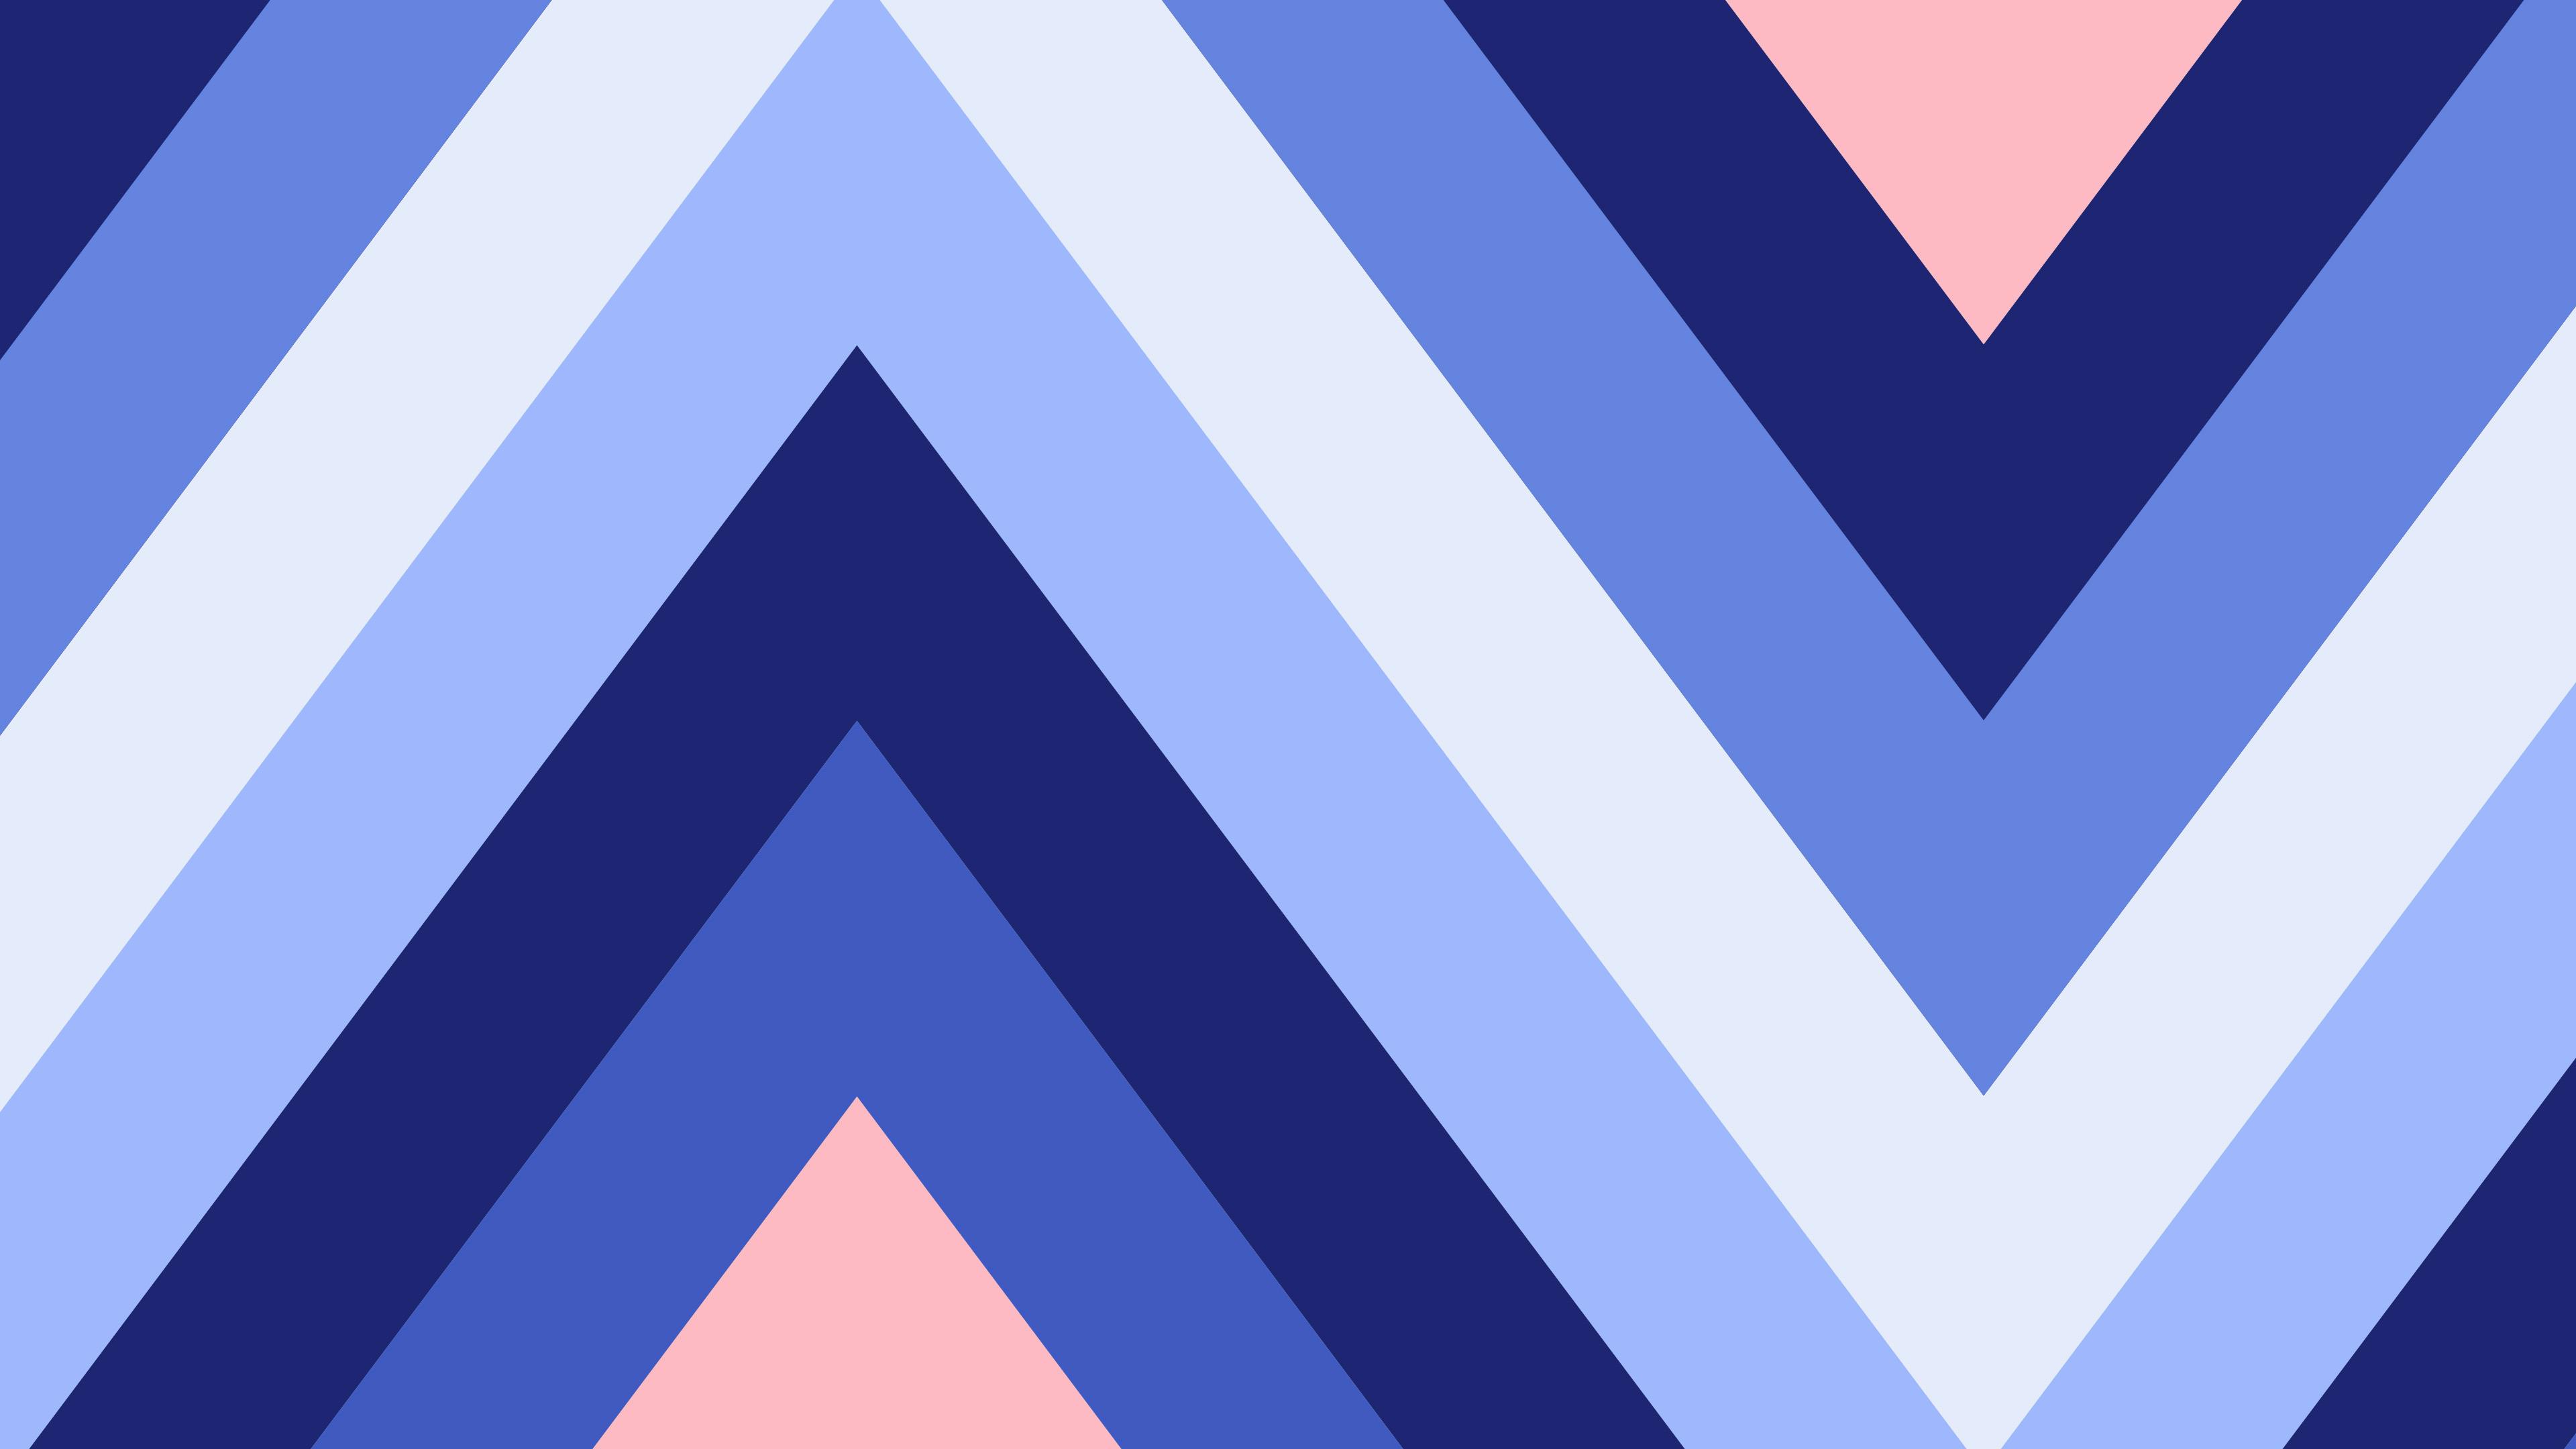 Zig-zag pattern with a pink, blue, and purple color palette.